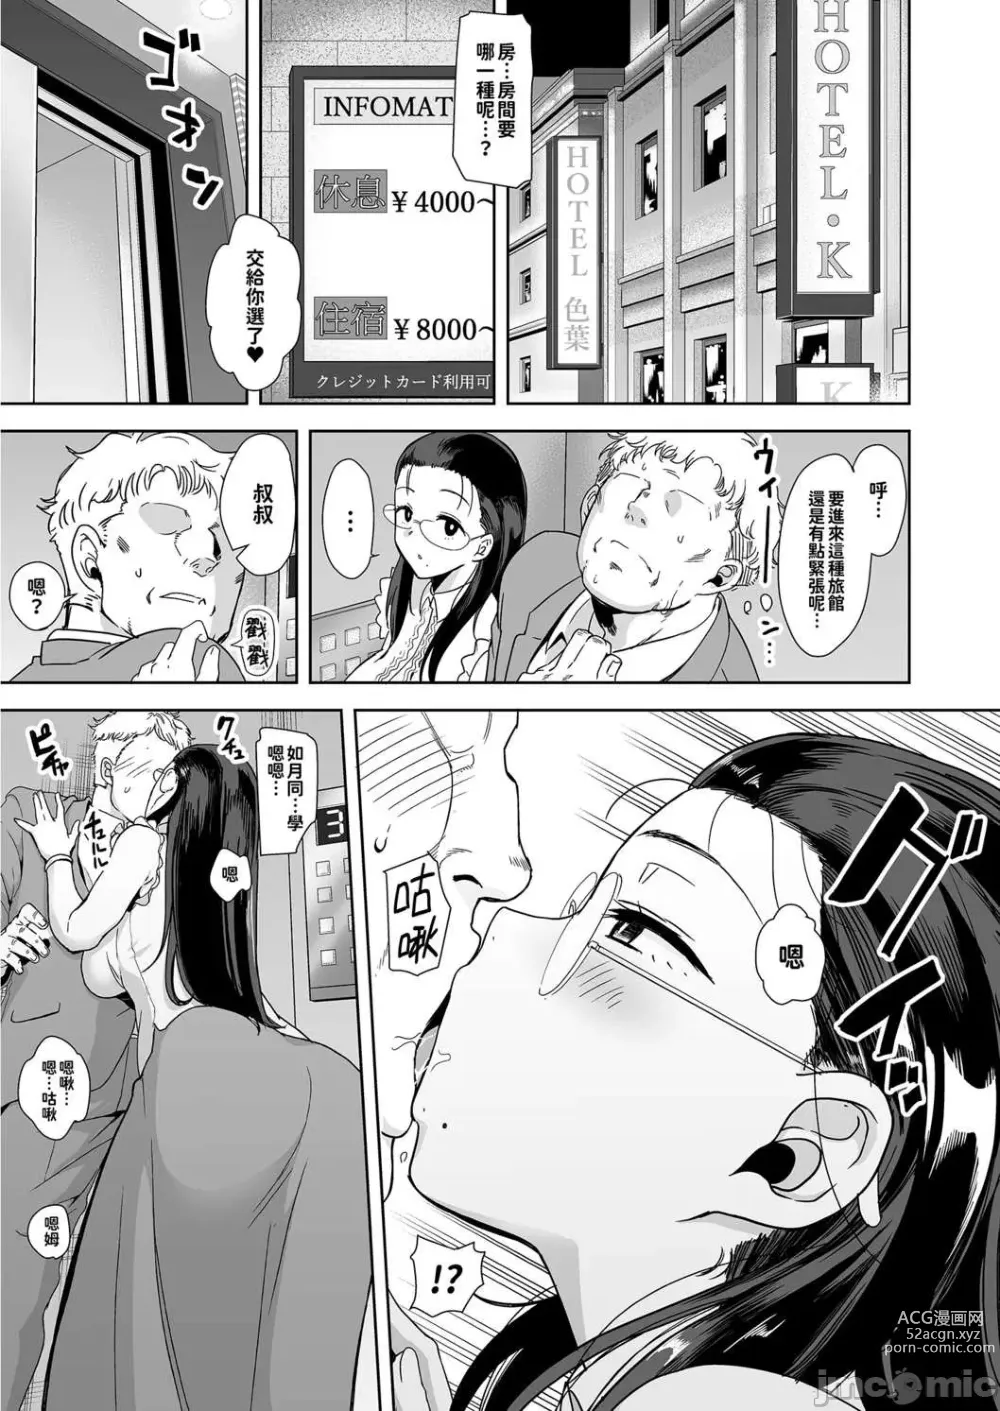 Page 6 of manga Seika Jogakuin High School Official Rod Uncle